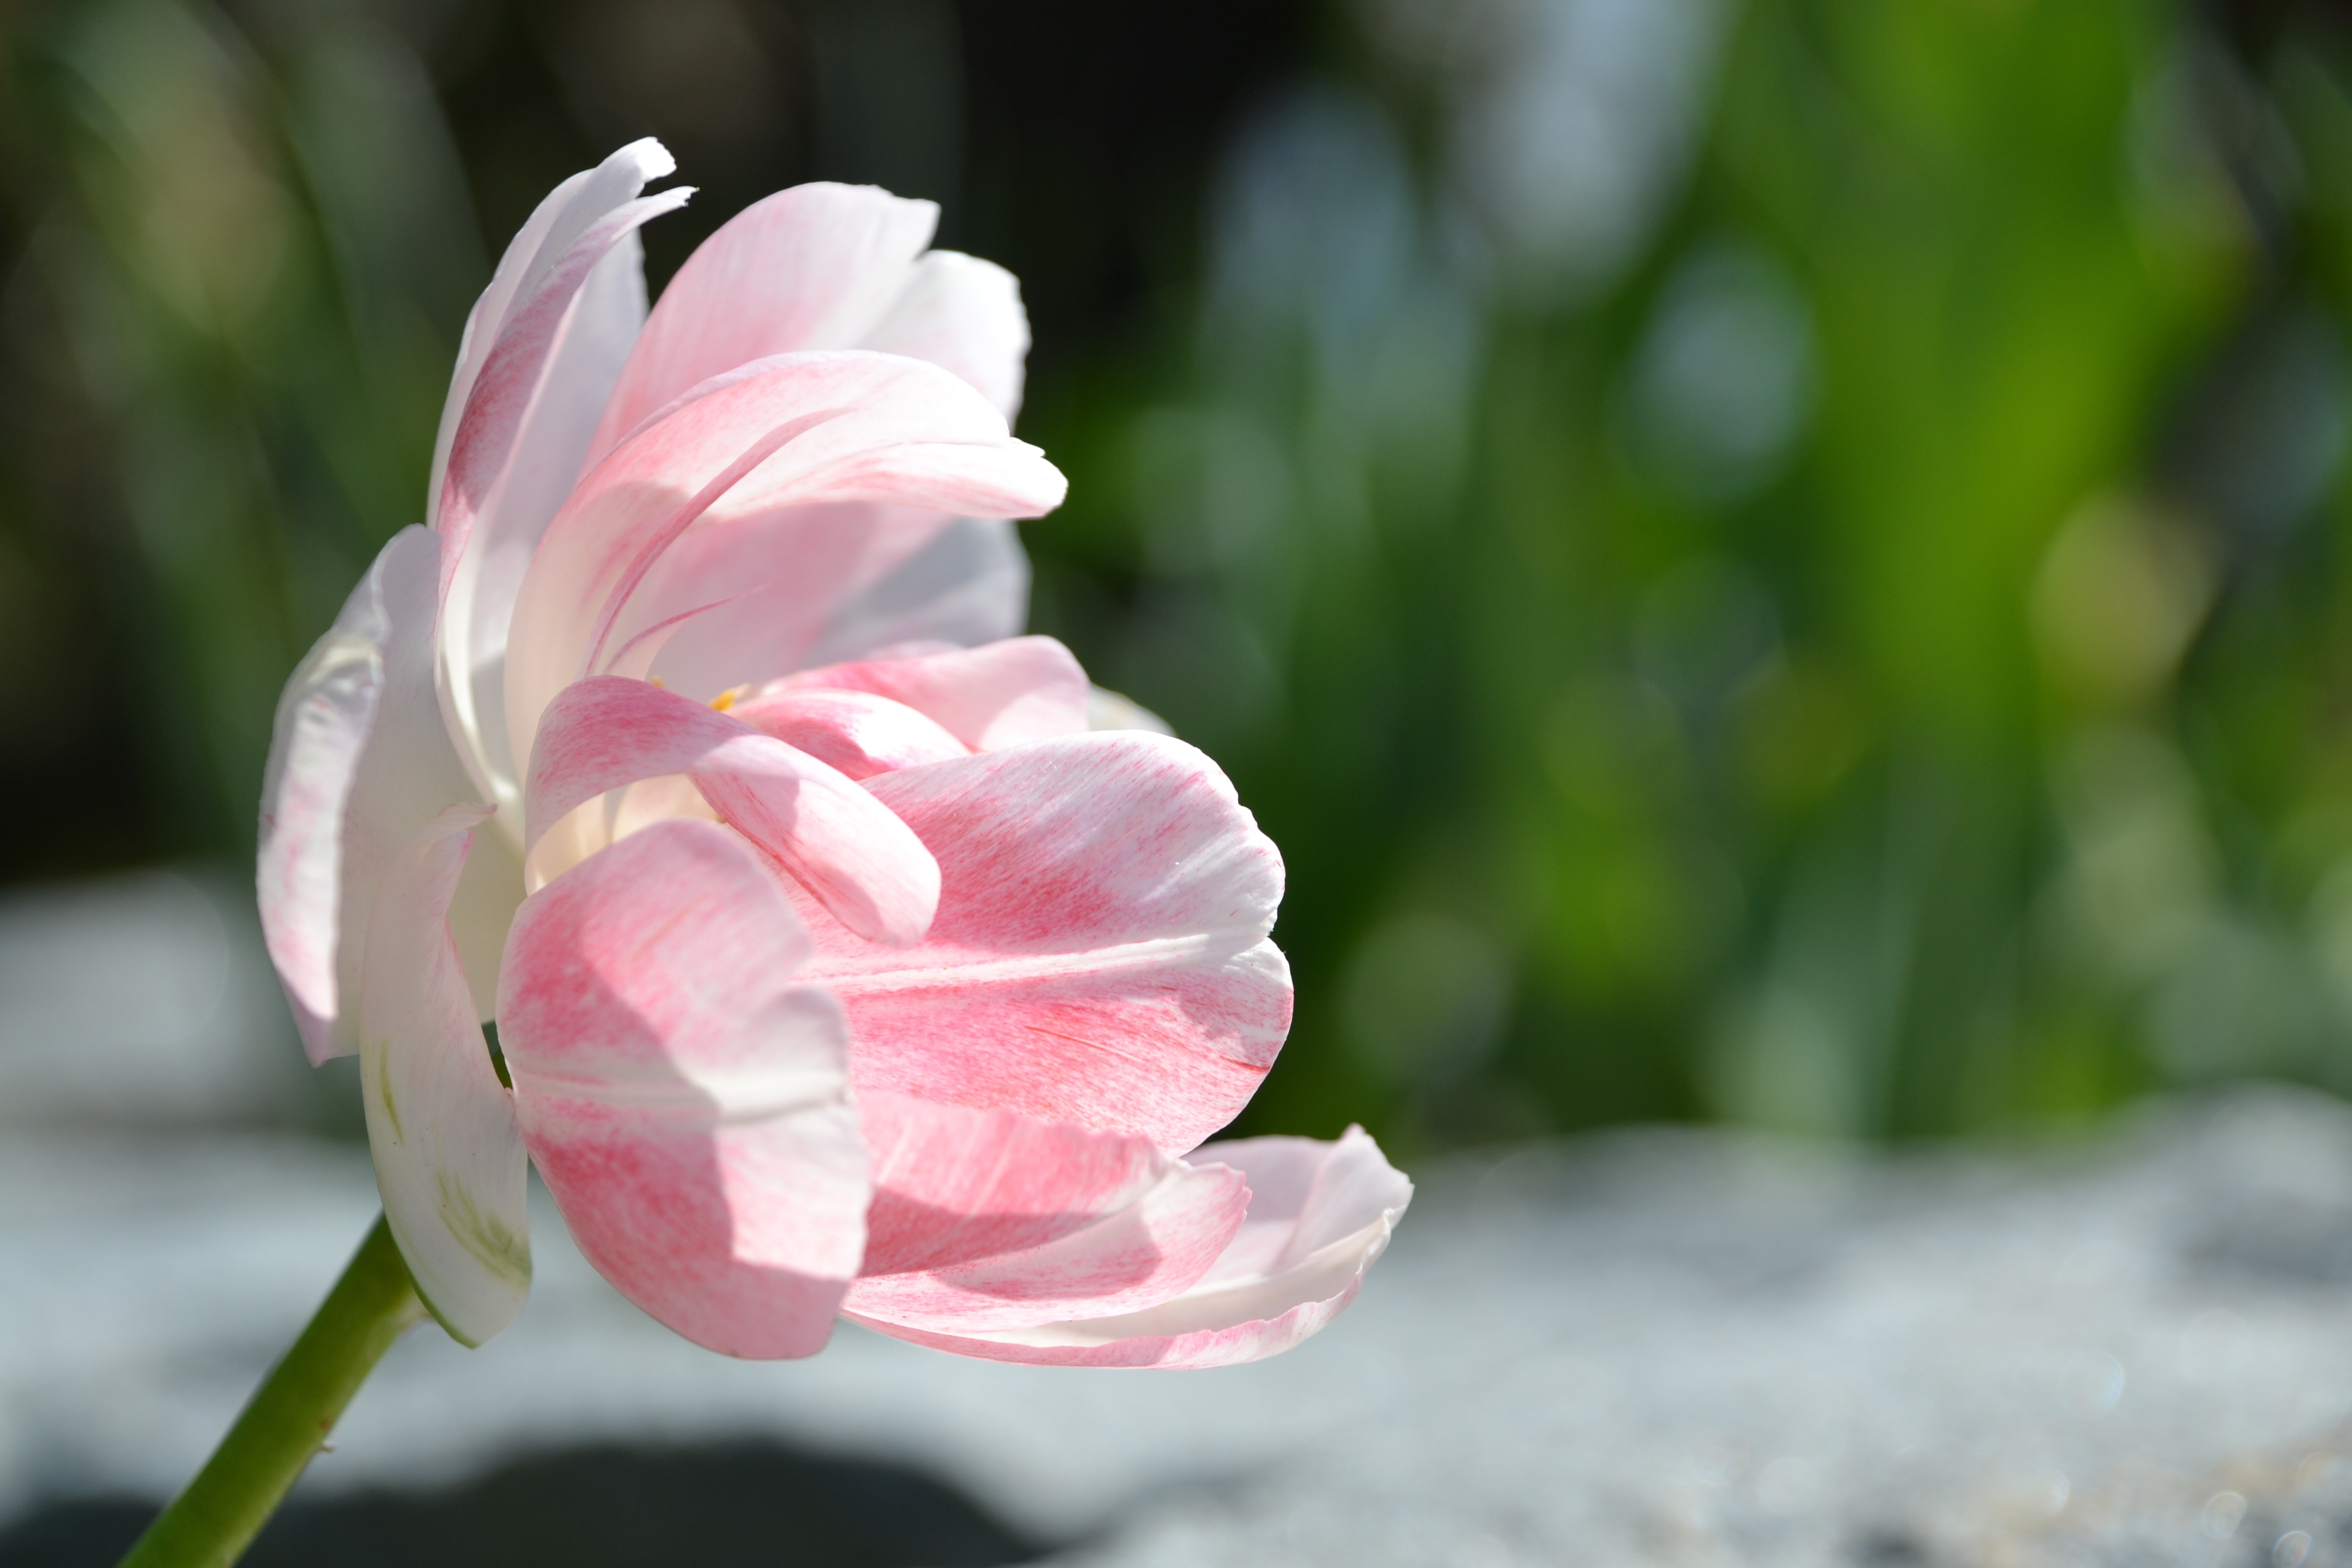 white and pink petal flower